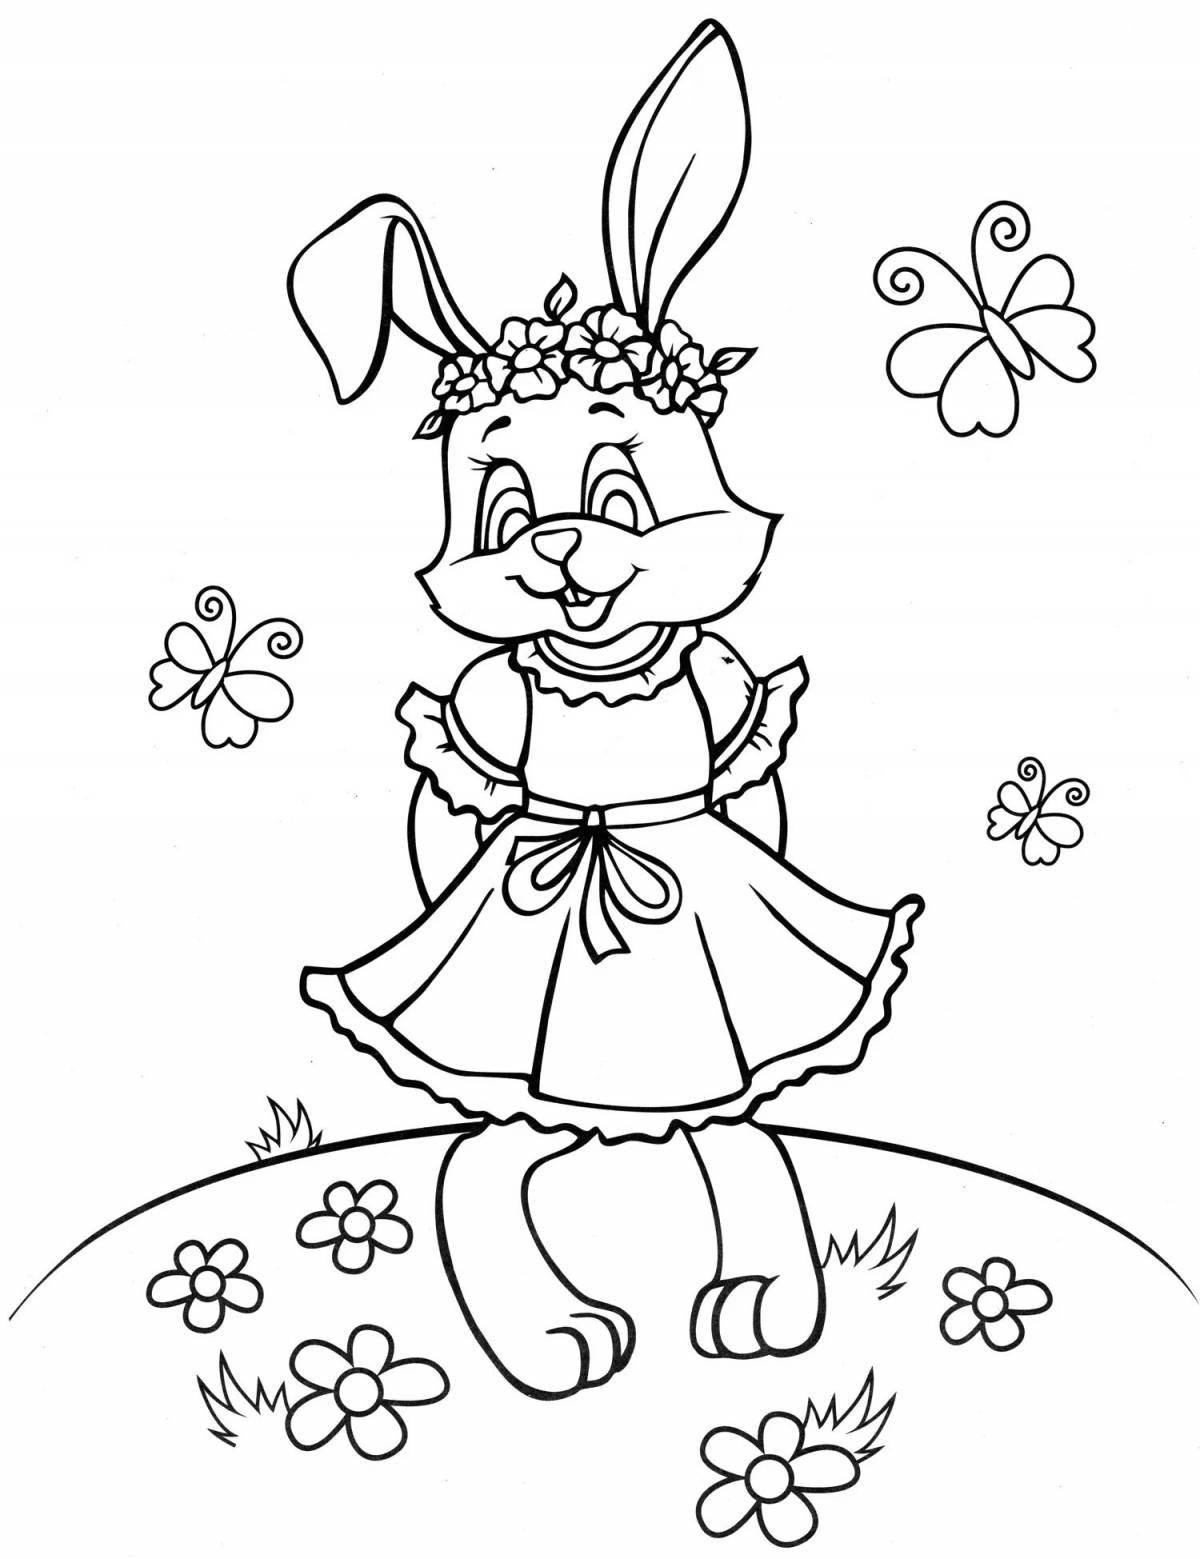 Glamor coloring bunny in a dress